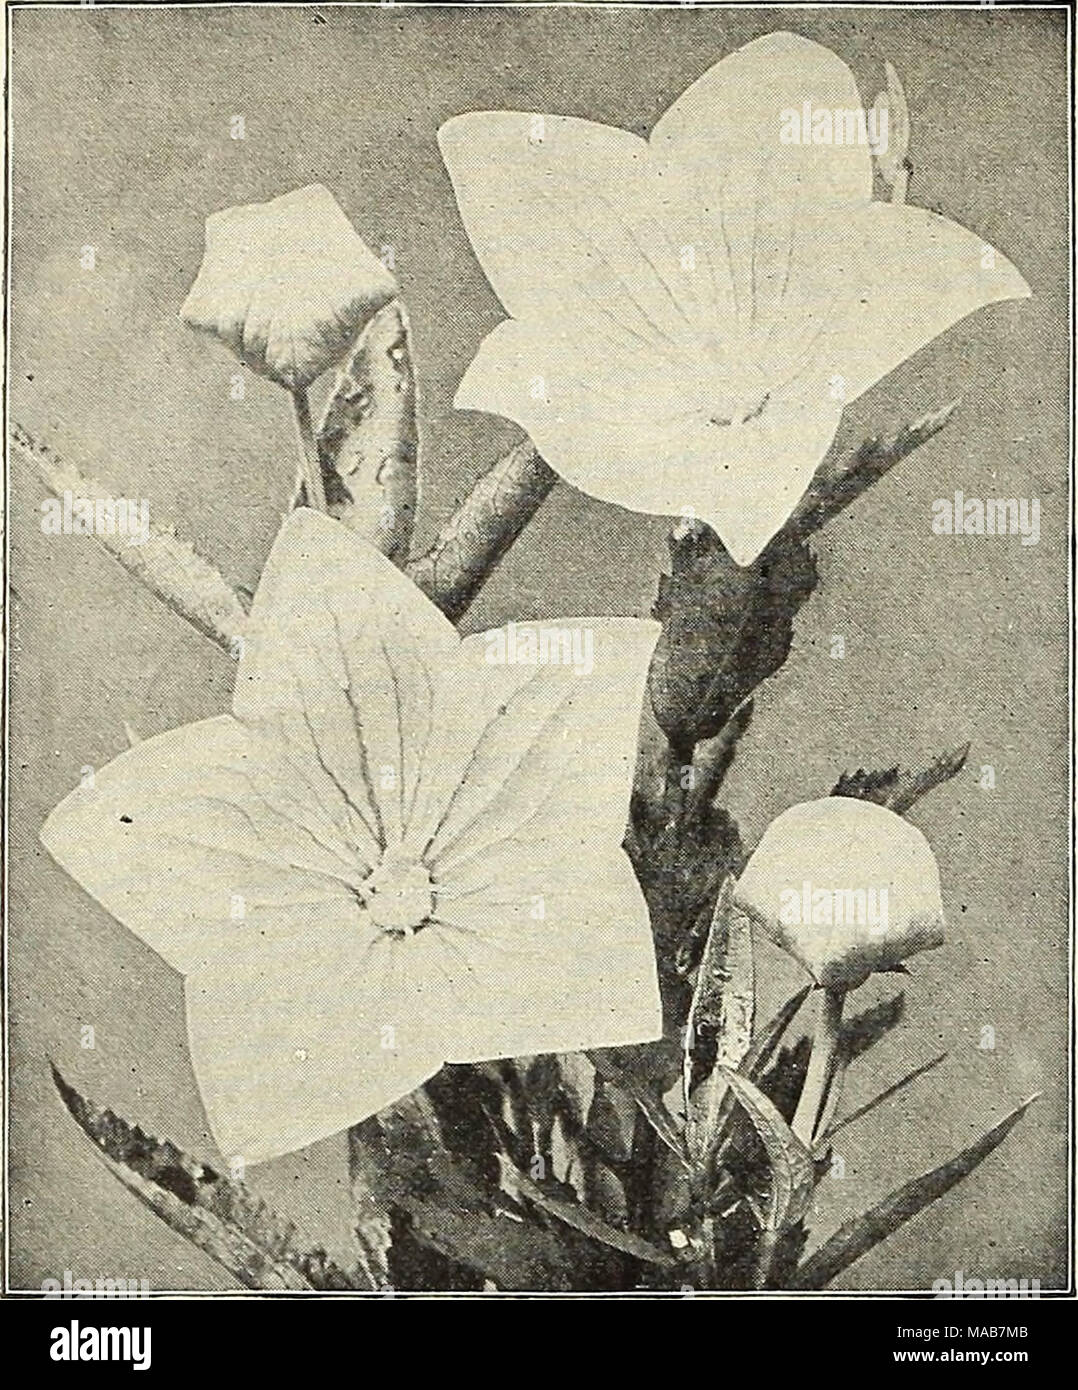 . Dreer's wholesale price list : flower seeds for florists plants for florists bulbs for florists vegetable seeds fertilizers, fungicides, insecticides, implements, etc . Platycodon Grandifloram Platycodon (Japanese Bell Flower) Perdoz. Orandiflora. Blue. Two-year-old roots. .. $150 &quot; White. Two-year-old roots. ISO Plumbago (Lead Wort) Larpentse. Strong plants, 3-inch pots.... 150 Polemonium (Jacob's Ladder) Reptaiis. 3-inch pots 1 75 Richardsoiii. 3-inch pots 1 75 &quot; Alba. 3-inch pots 175 Potentilla (Cinquefoil) Panorama. Double orange with reddish- purple stripes 2 50 Variabilis Ple Stock Photo